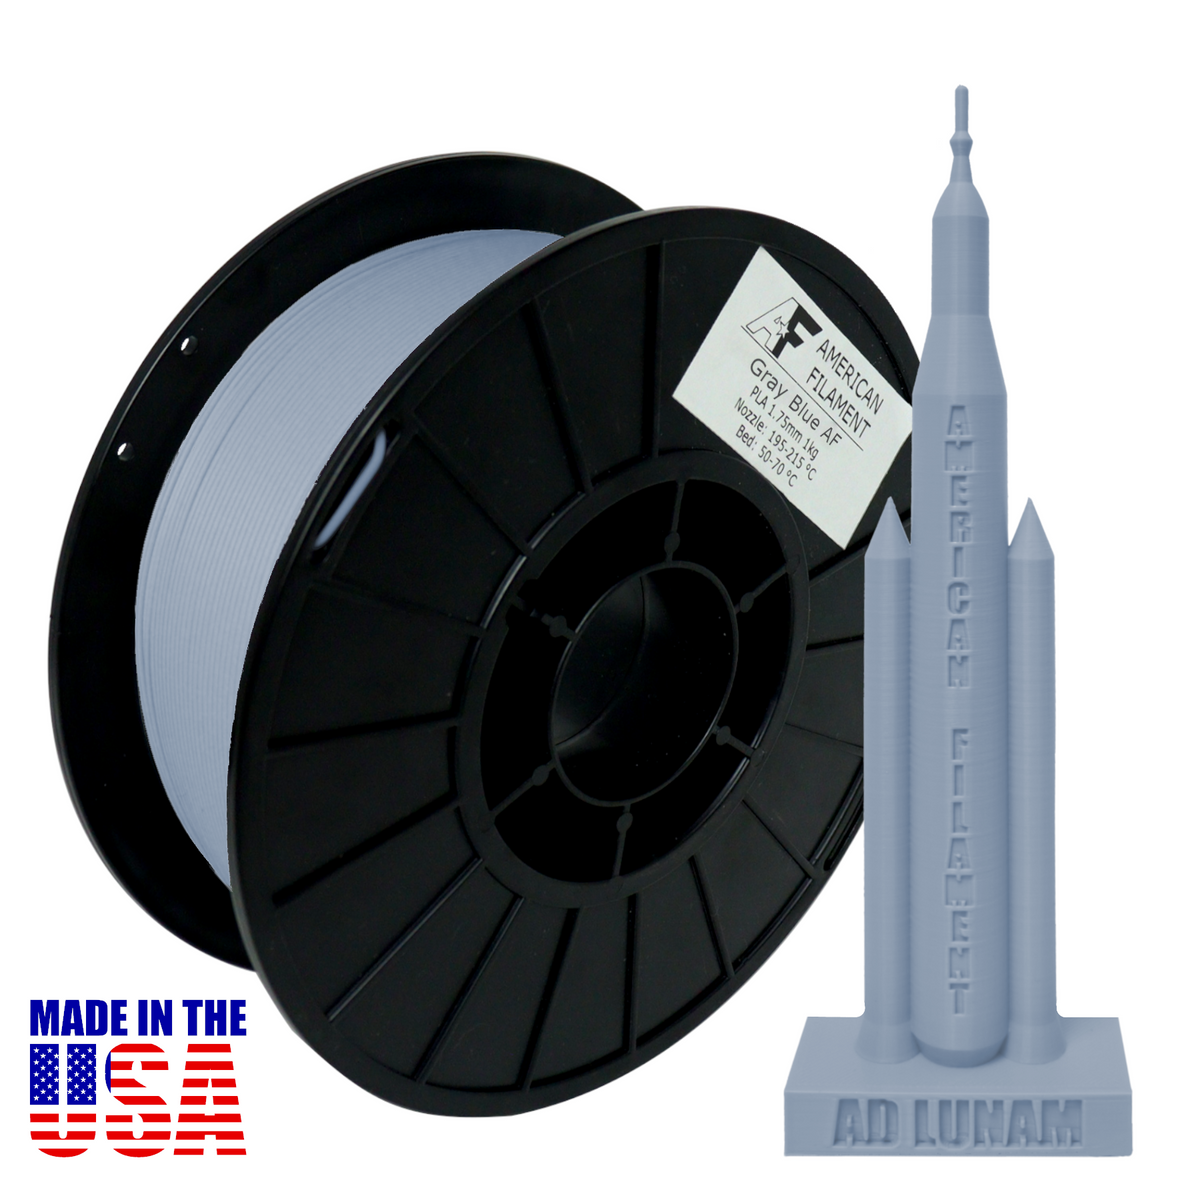 Gray Blue AF 1.75mm PLA Filament - Made in the USA!